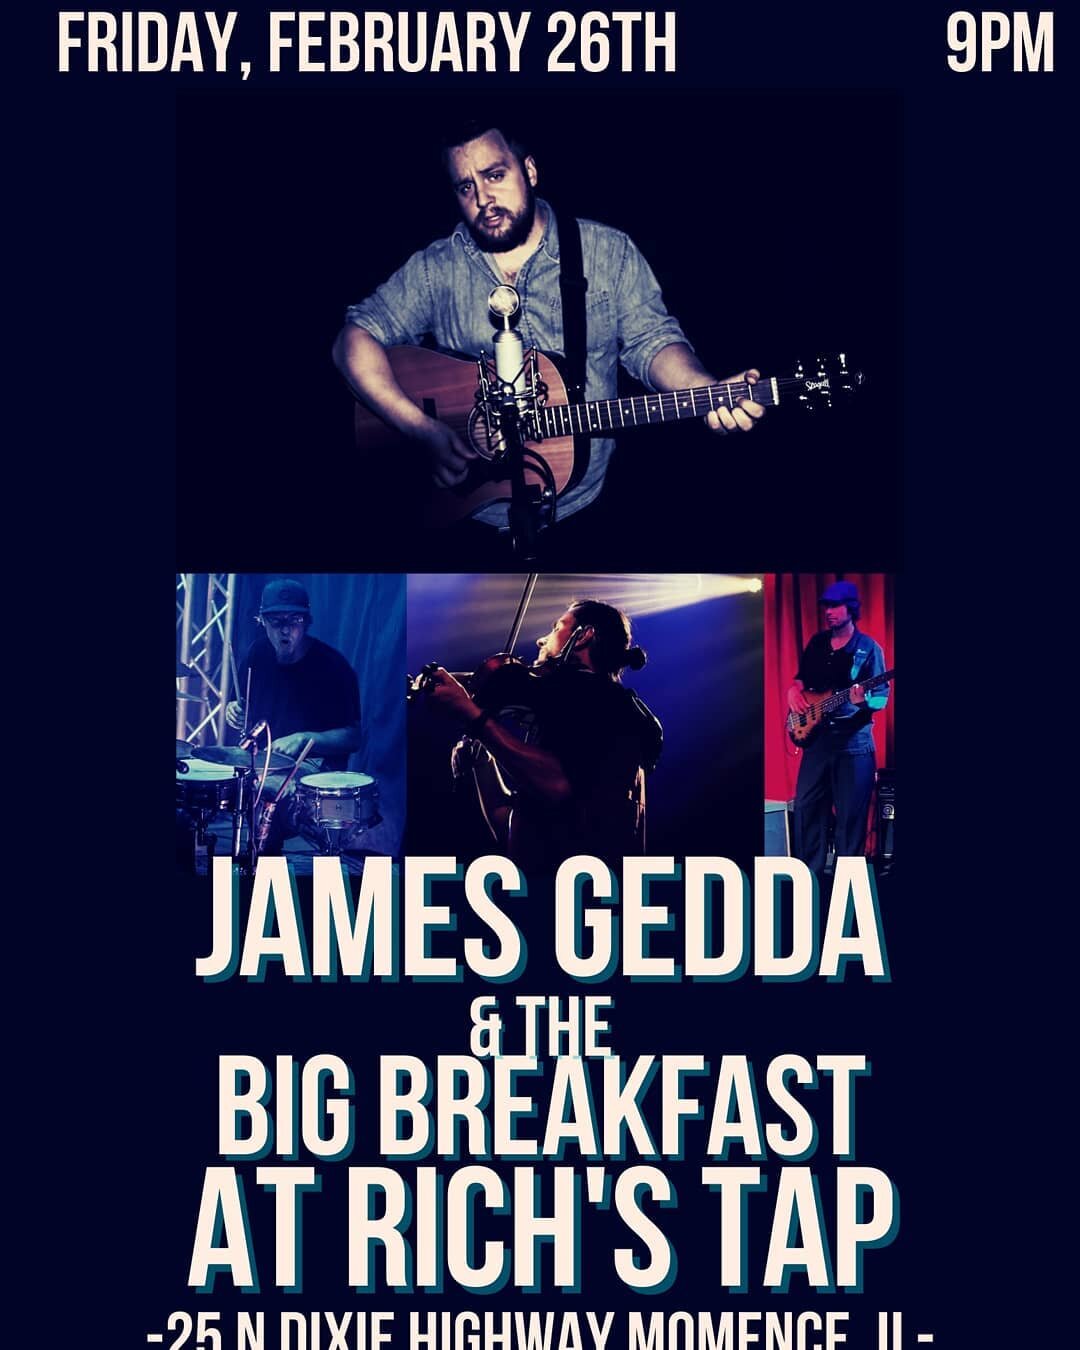 Tomorrow! Back at it with The Big Breakfast at  Rich's Tap in Momence. Kevin Mardirosian on drums, Matt Cartwright on bass, and Stephan Jude of @freshhops on violin! It's gonna be a good time, so come join us! #americana #countrymusic #singersongwrit